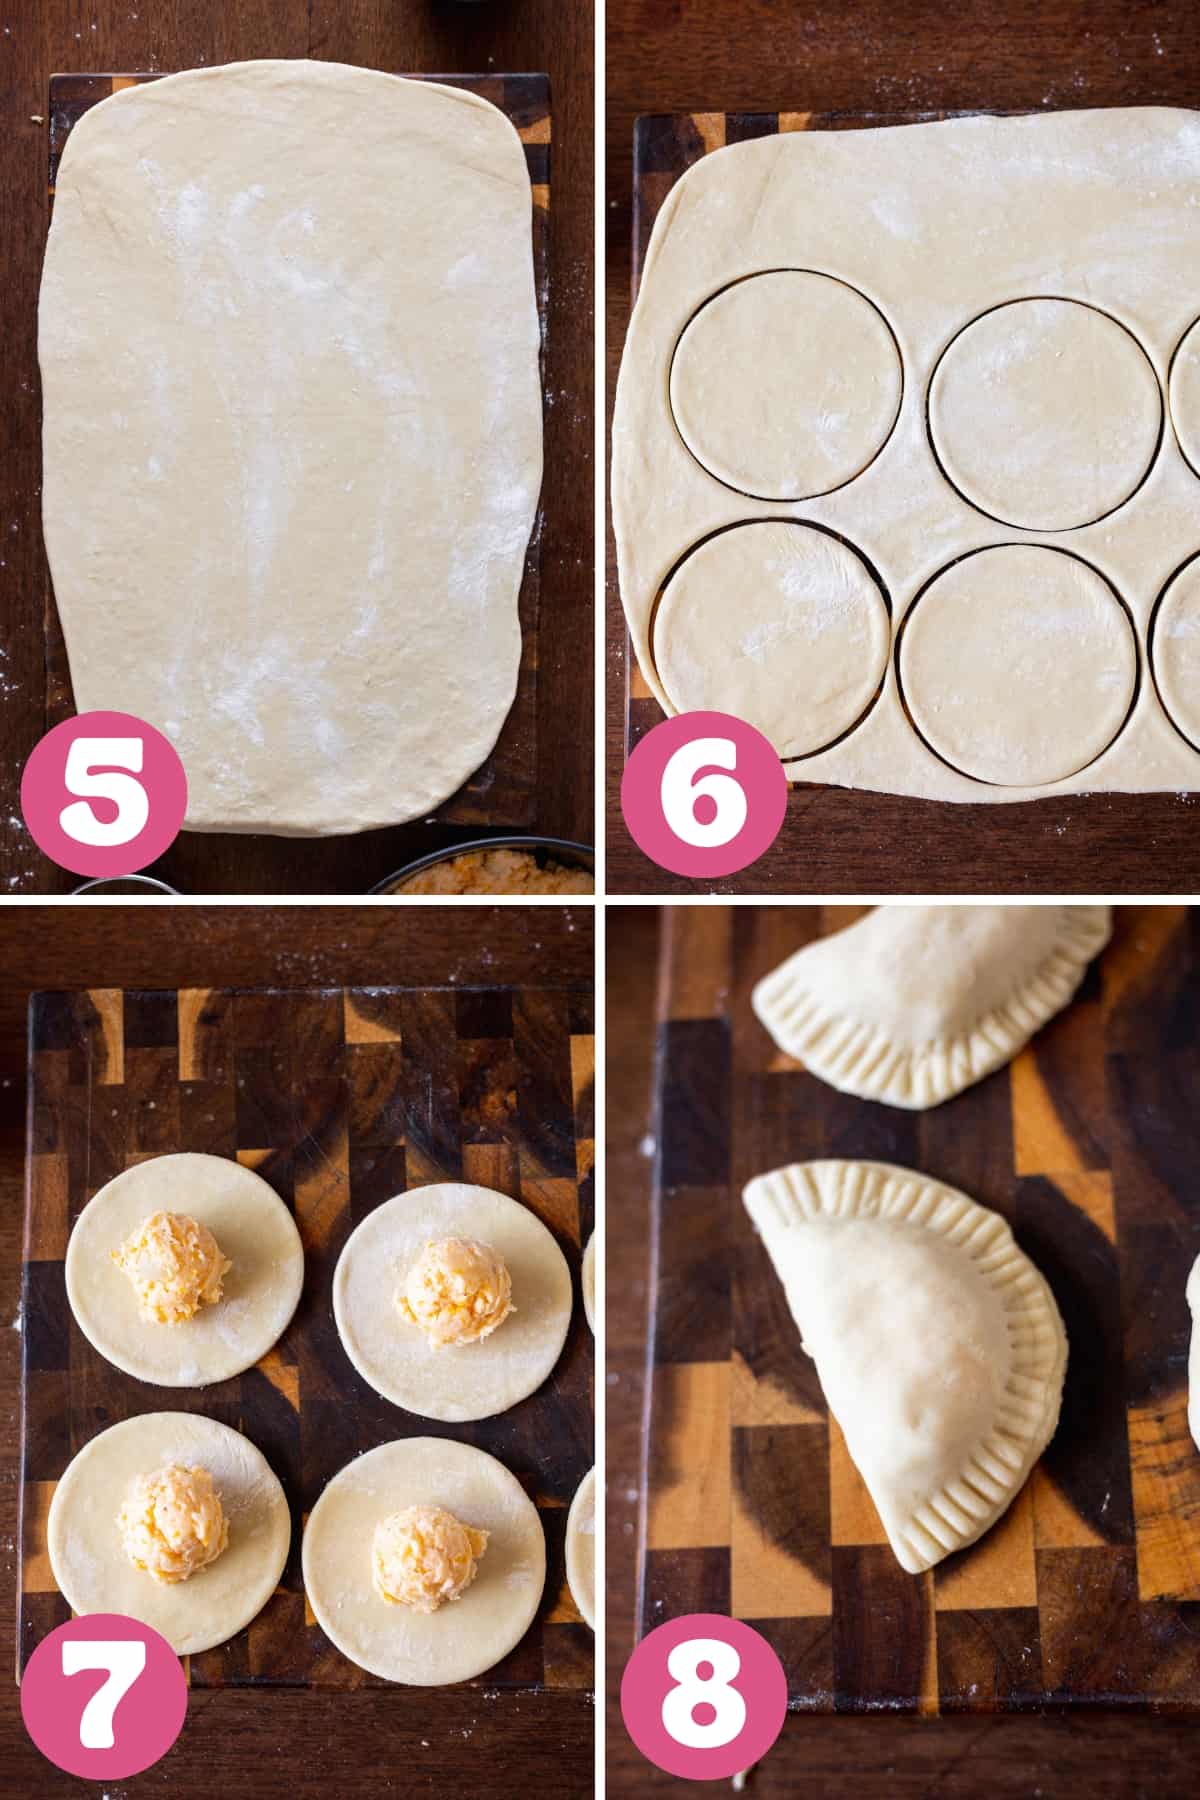 Showing how to make loaded pierogi in steps 5 through 8